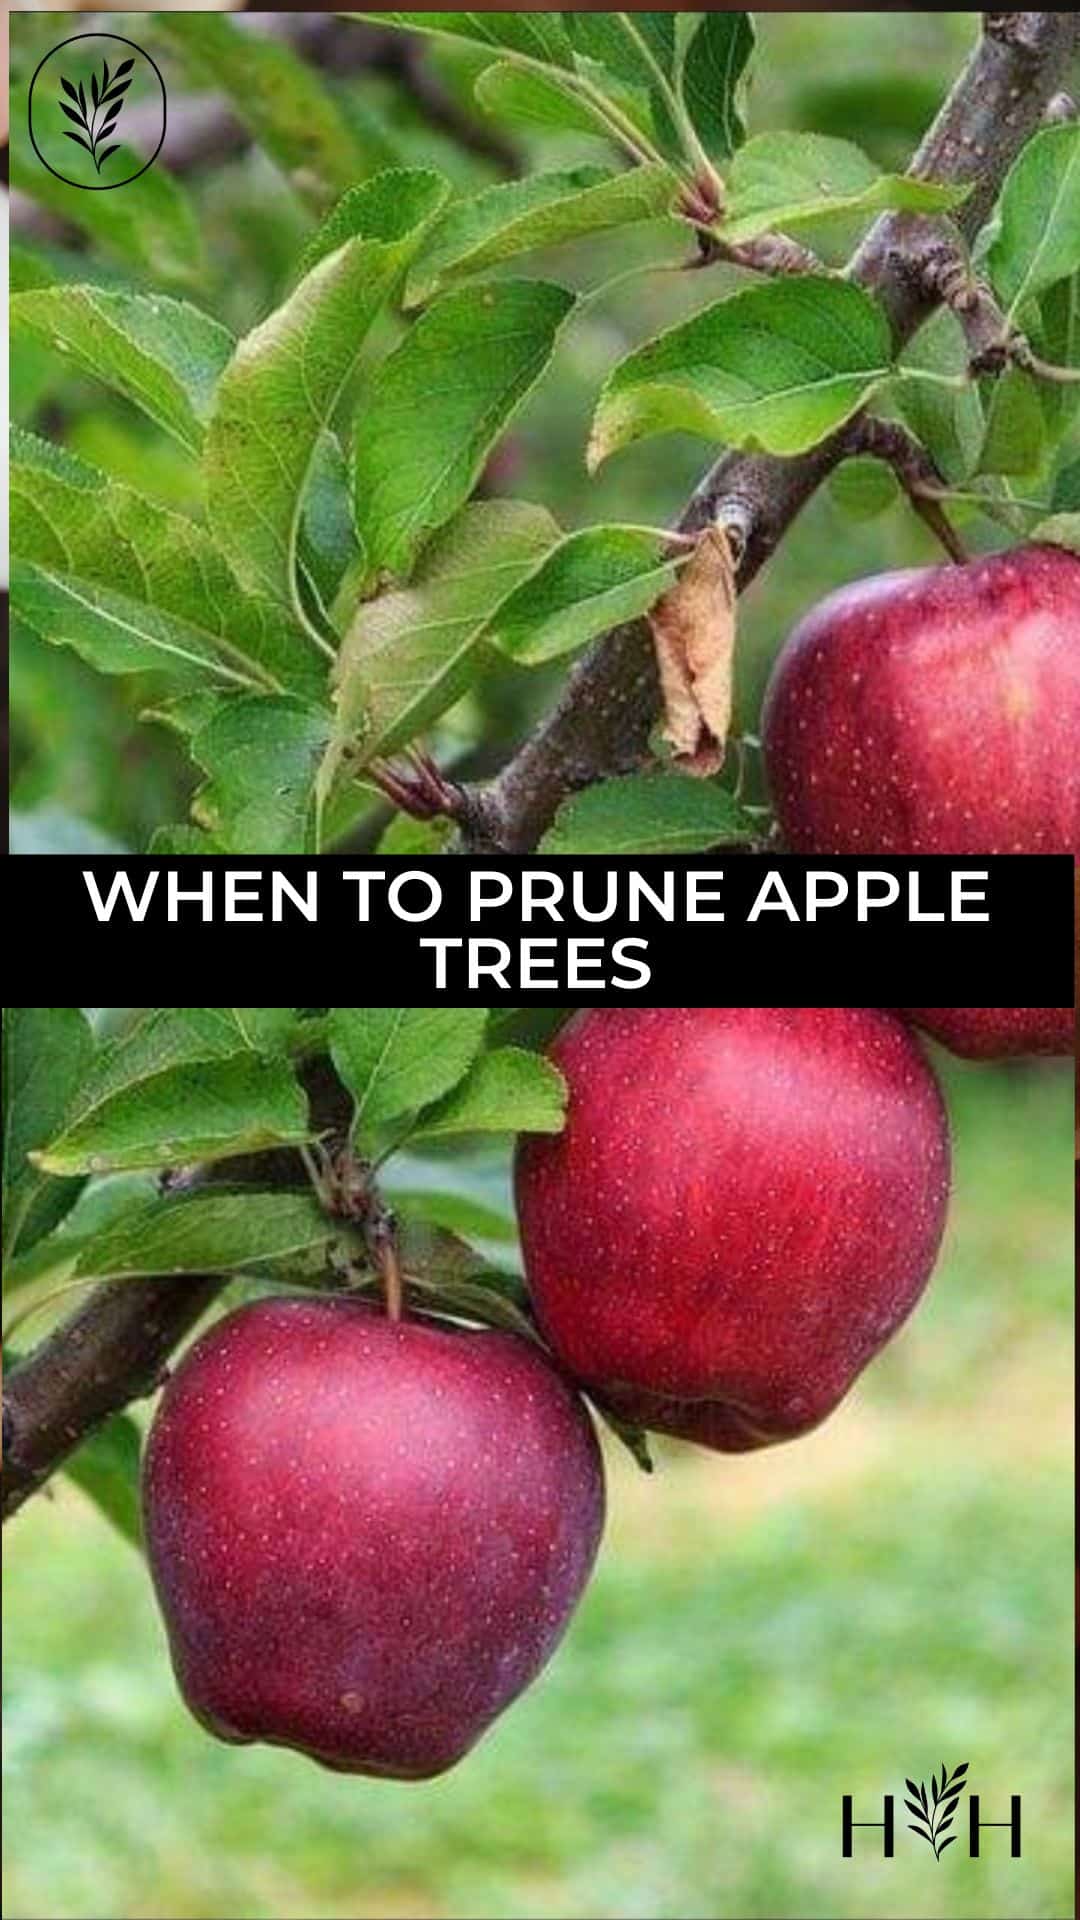 When to prune apple trees via @home4theharvest